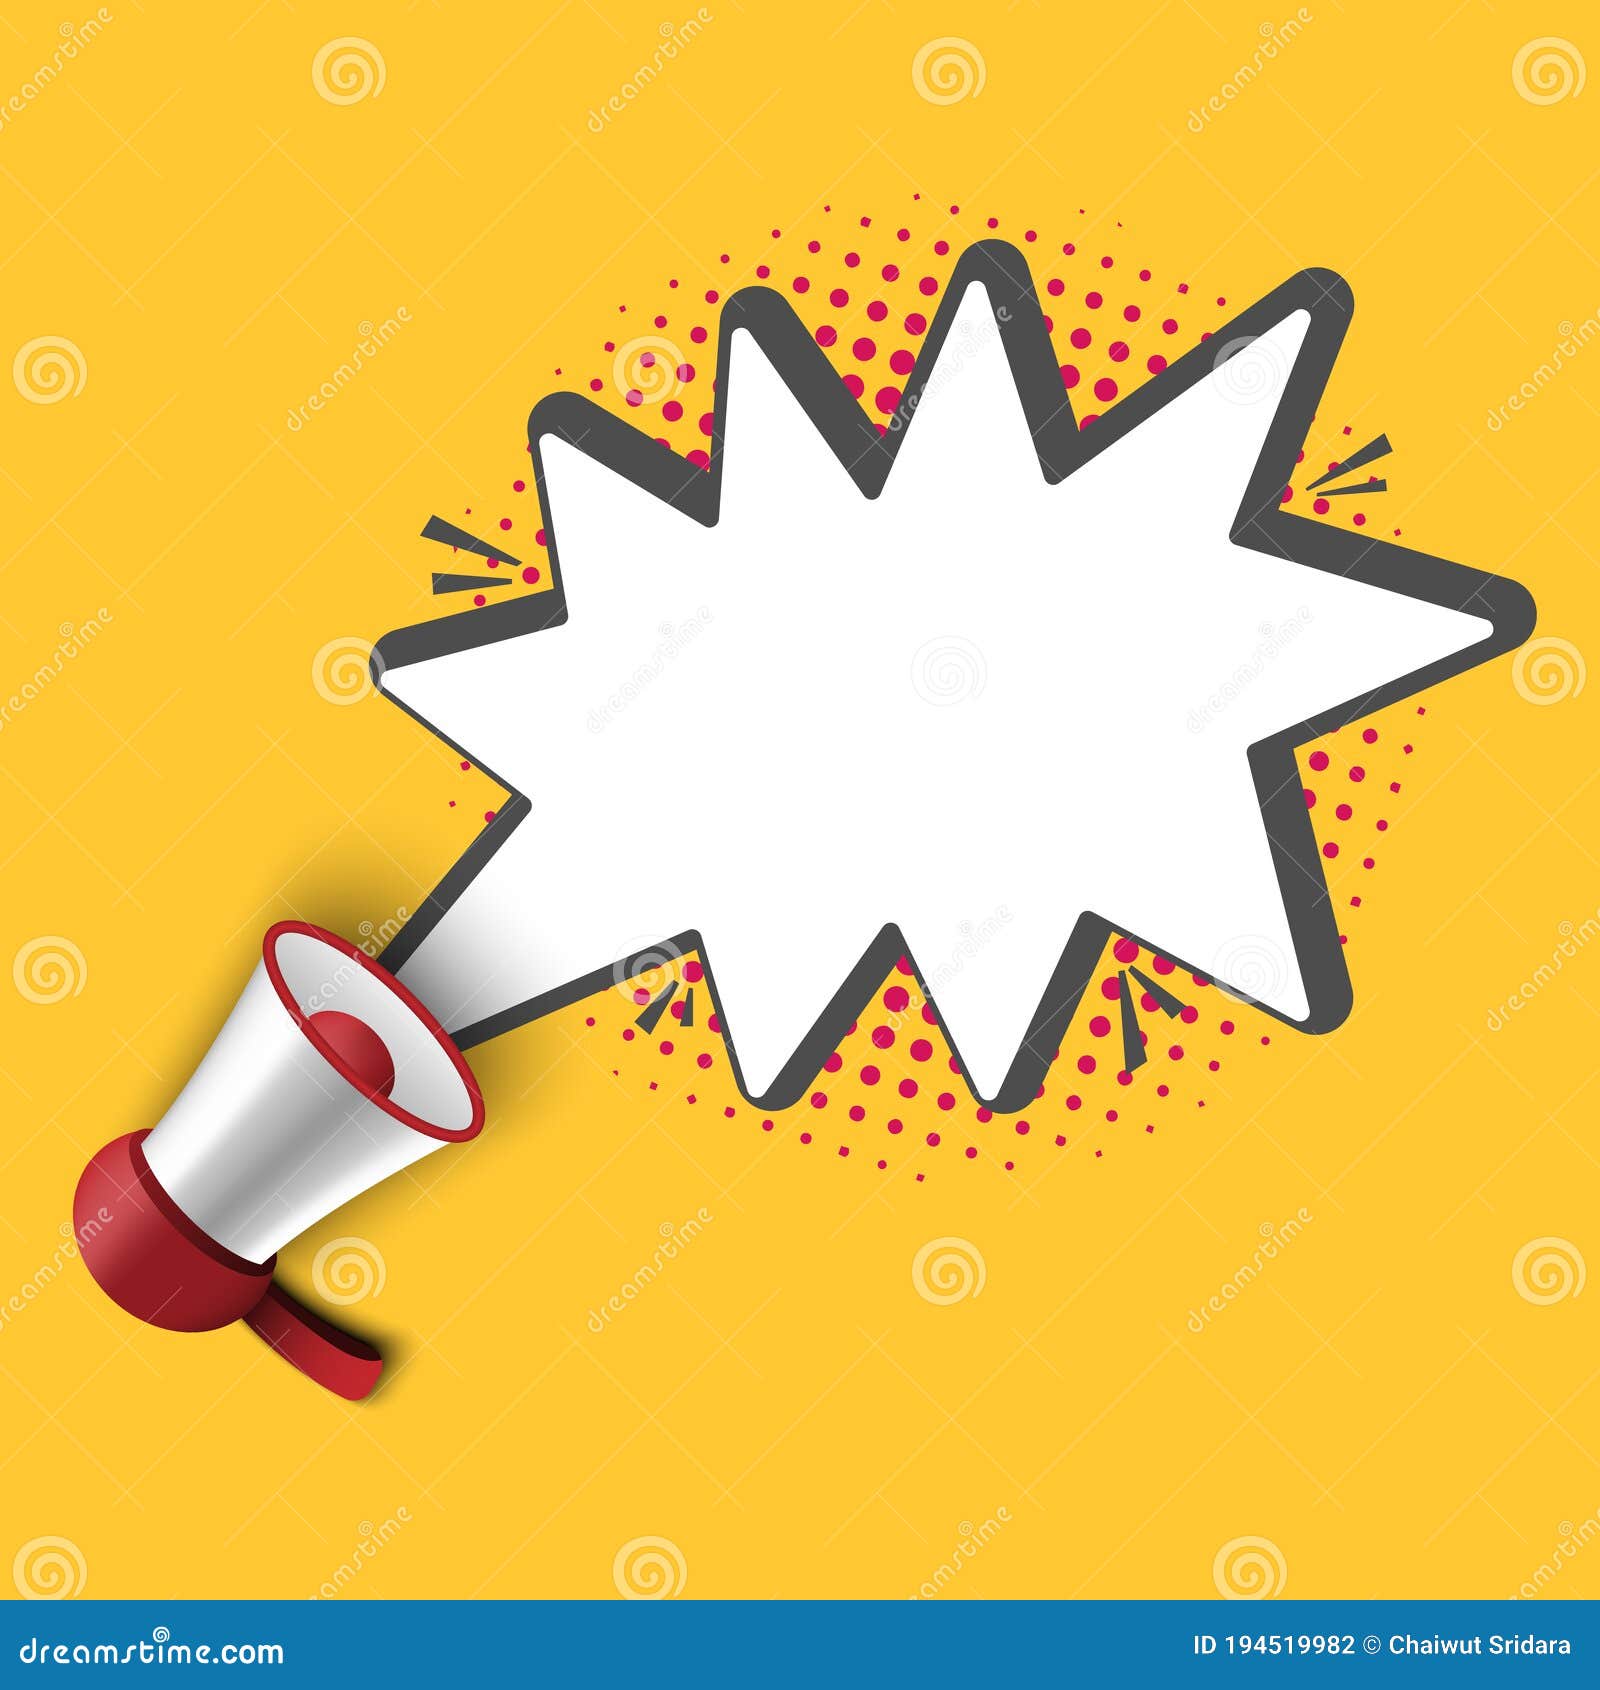 megaphone with bubble speech template for advertisment, 